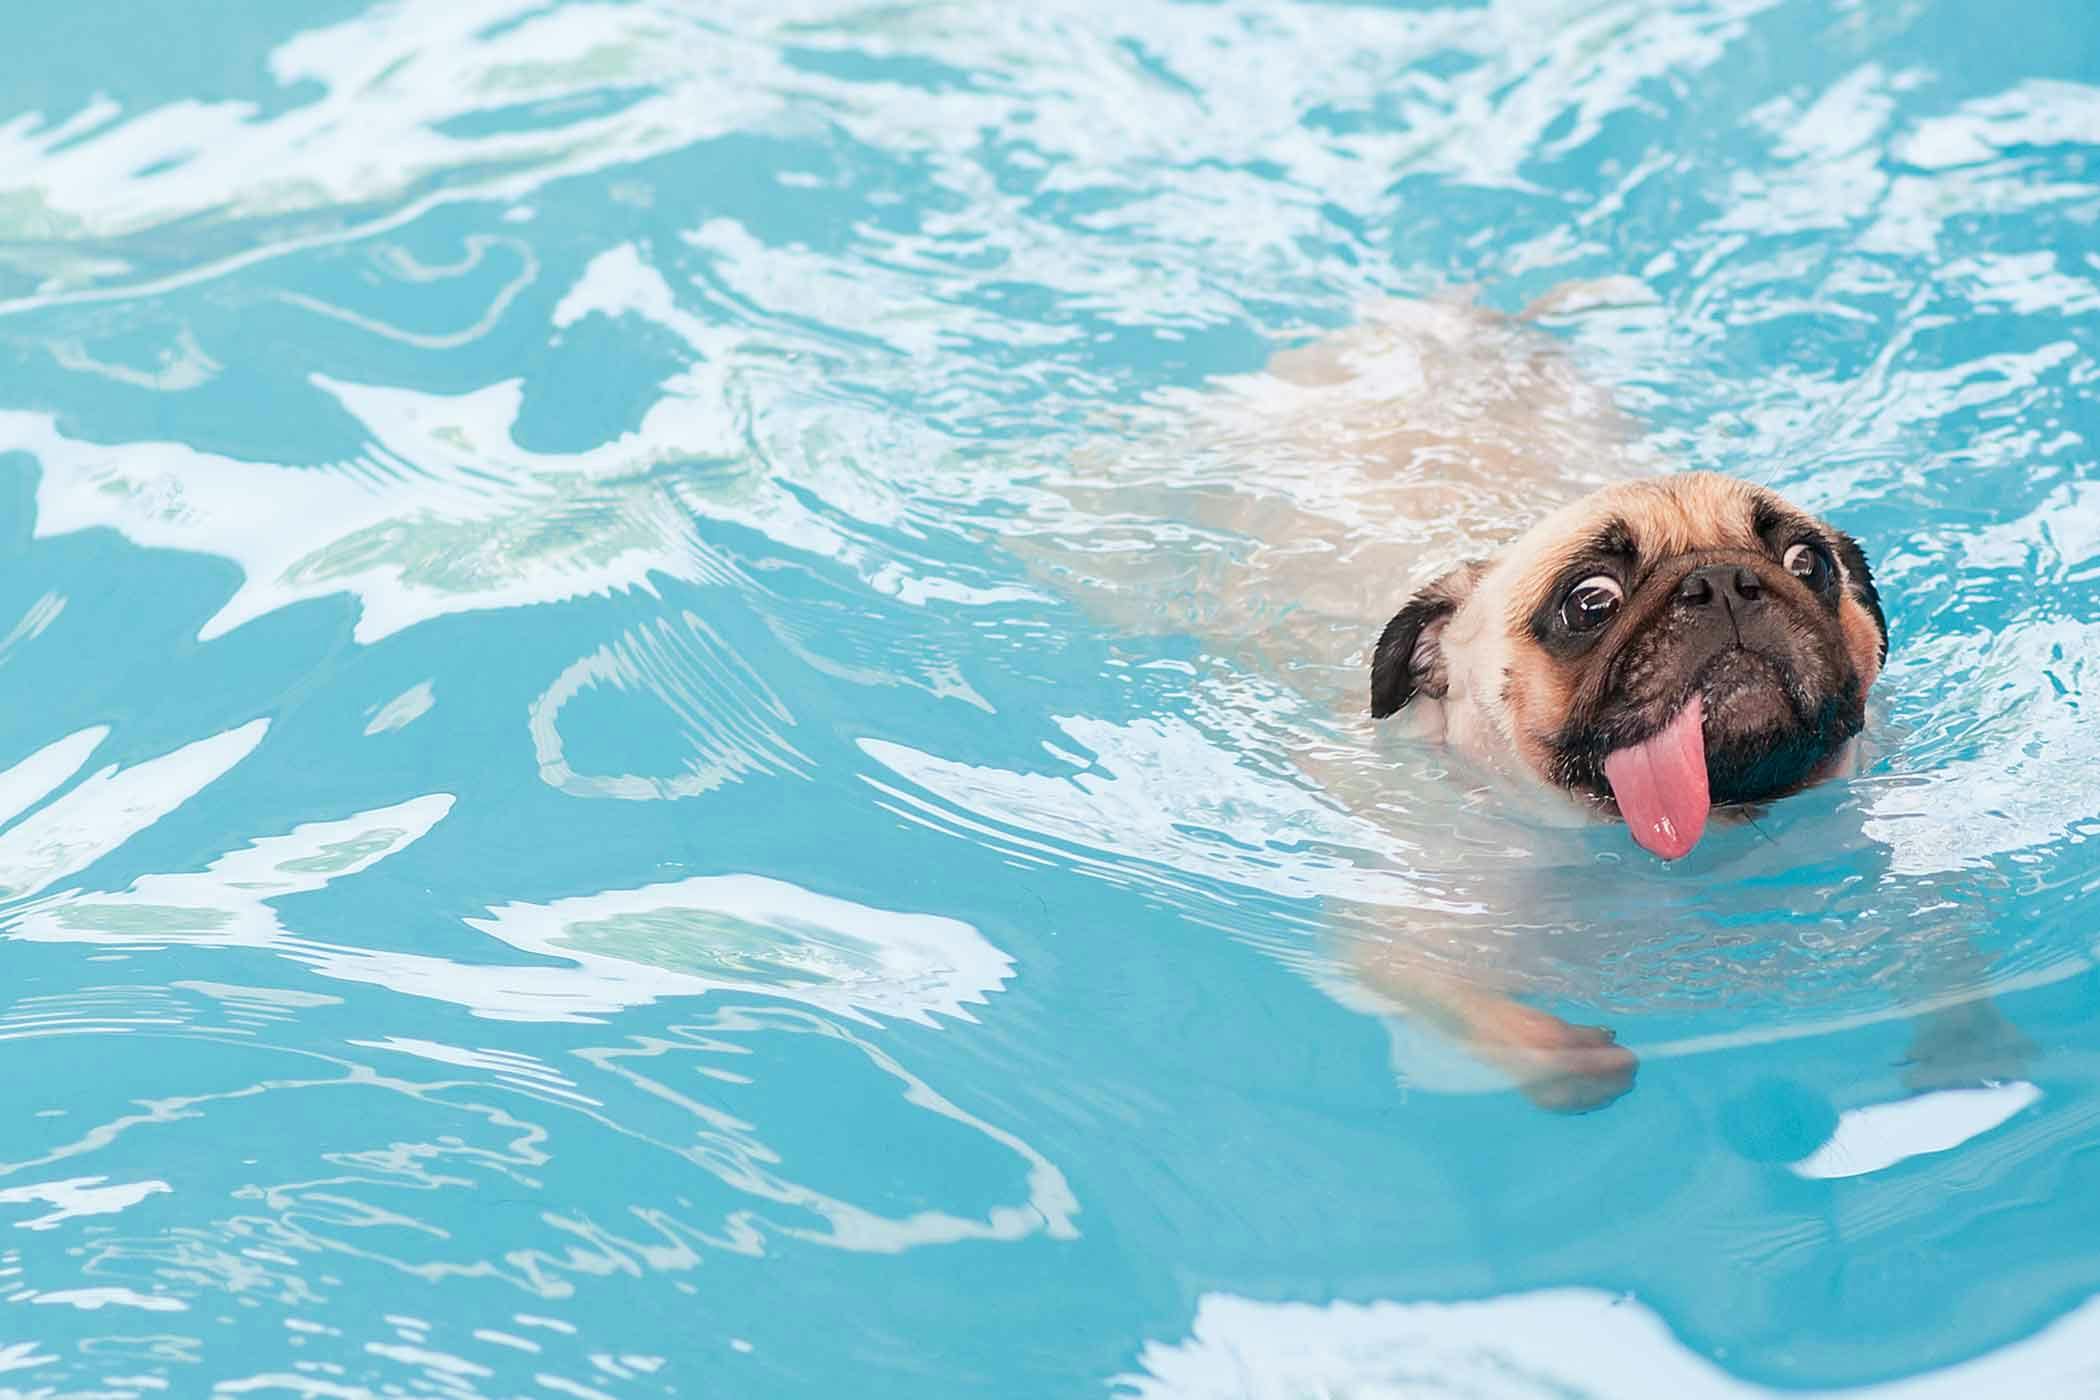 How to Train Your Dog to Swim in a Pool | Wag!